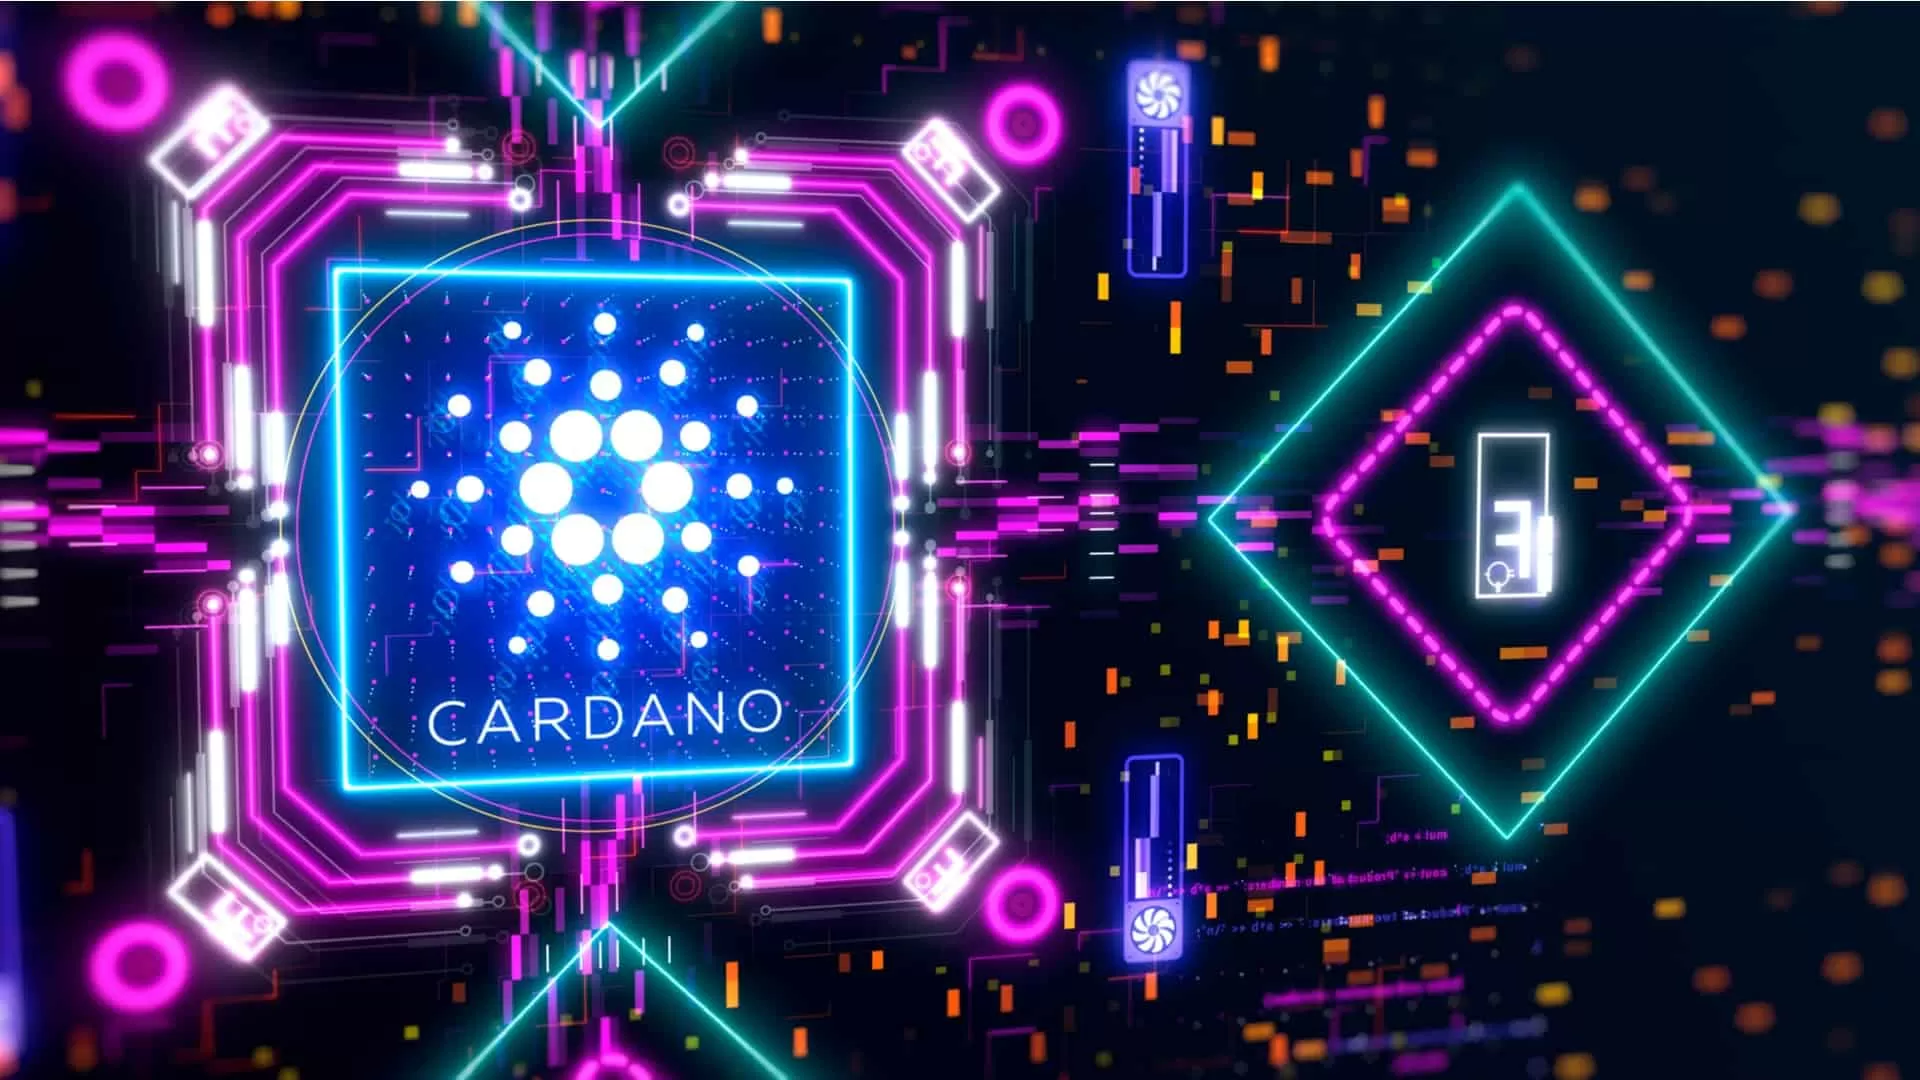 Cardano Price Prediction Is About To Flip Very Bullish: Here's Why